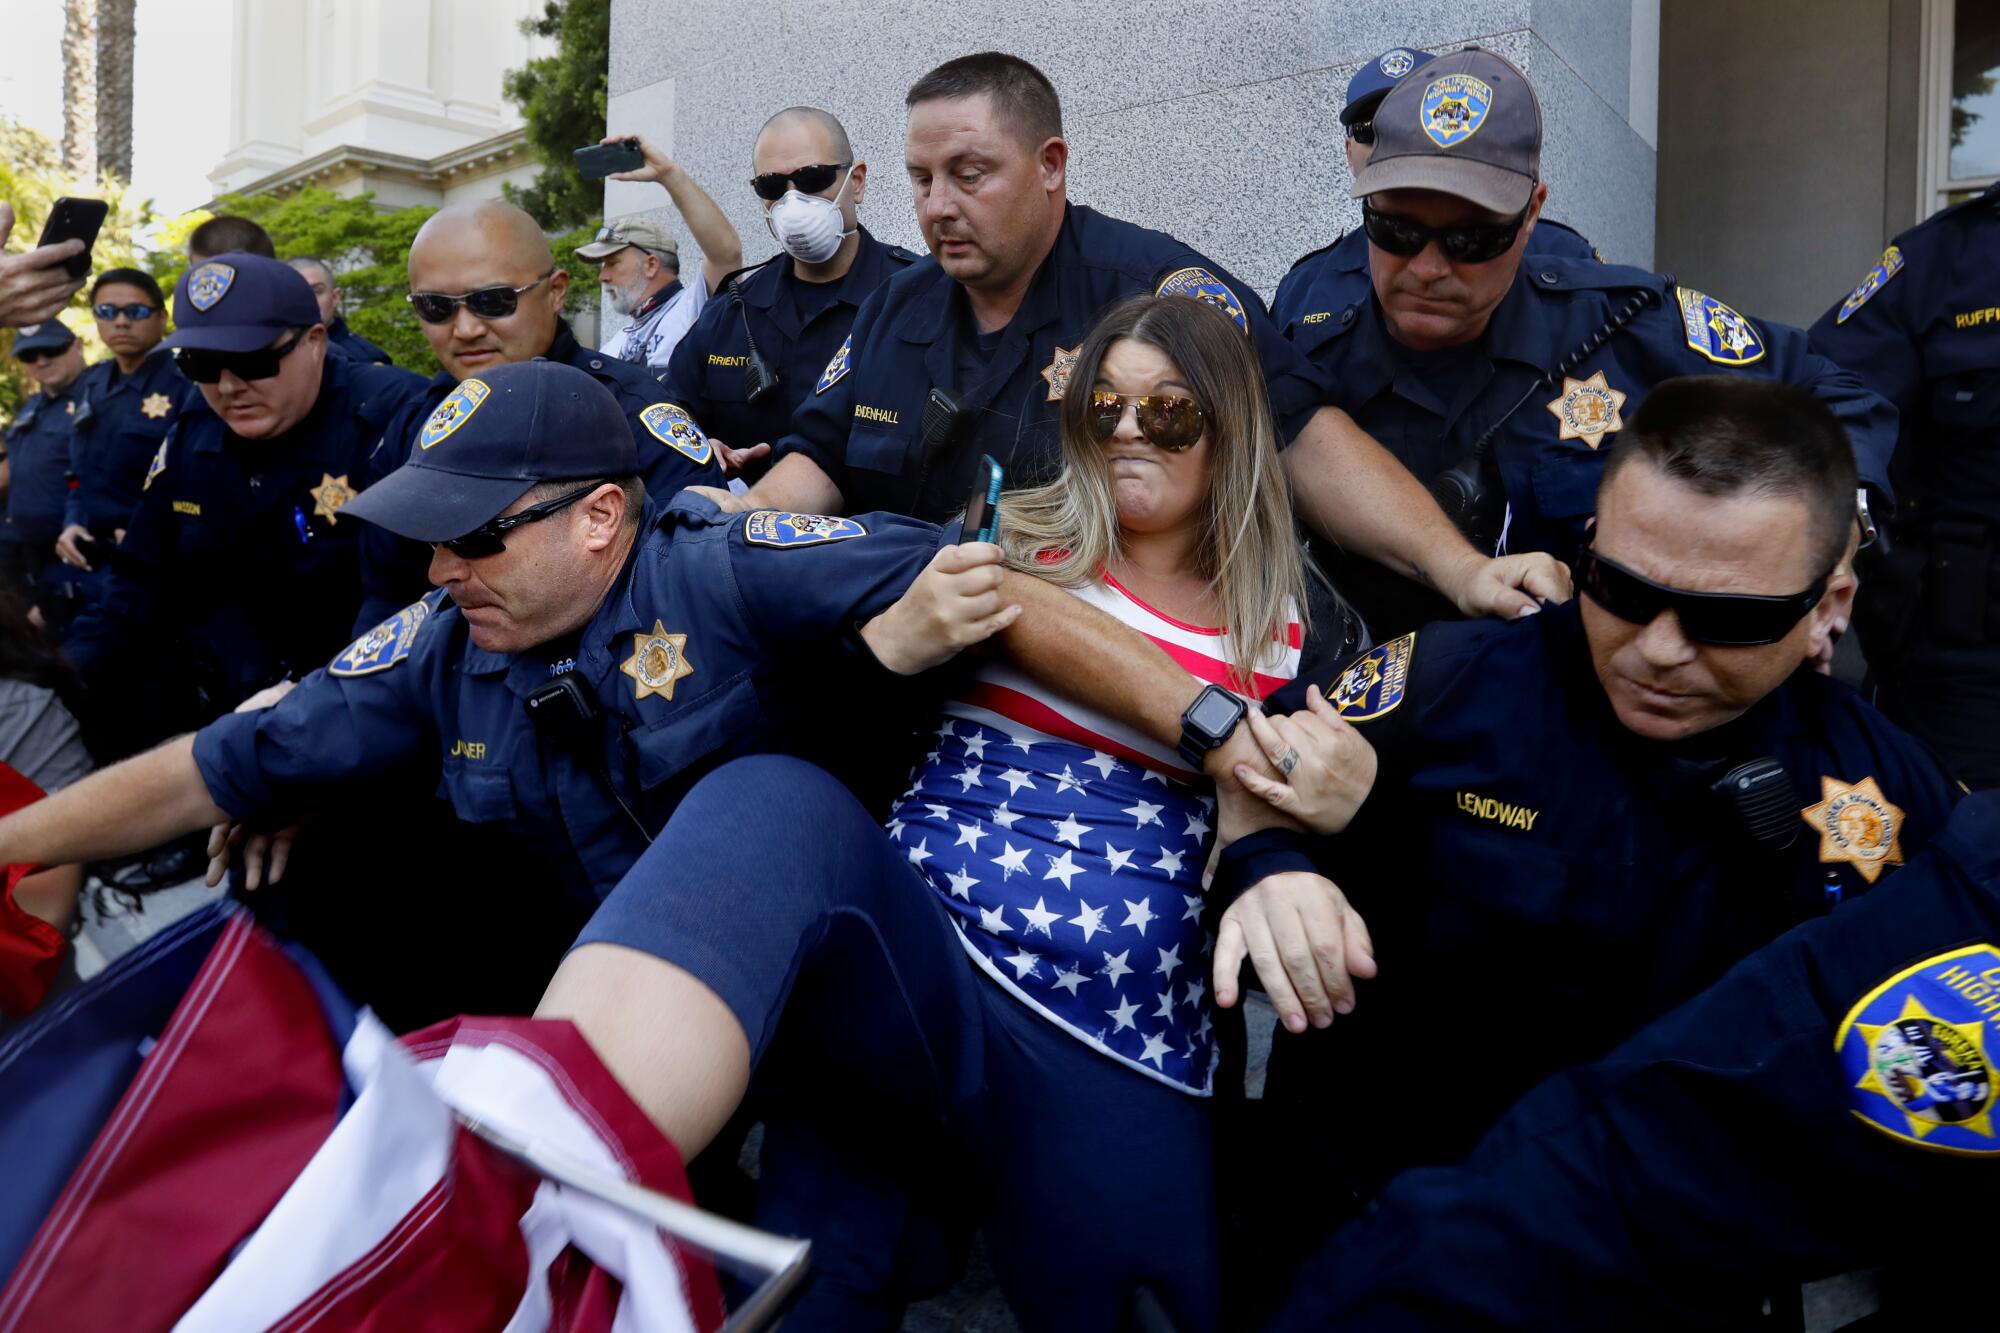 California Highway Patrol officers take into custody a woman who refused to follow orders to move off the Capitol grounds during a protest Friday